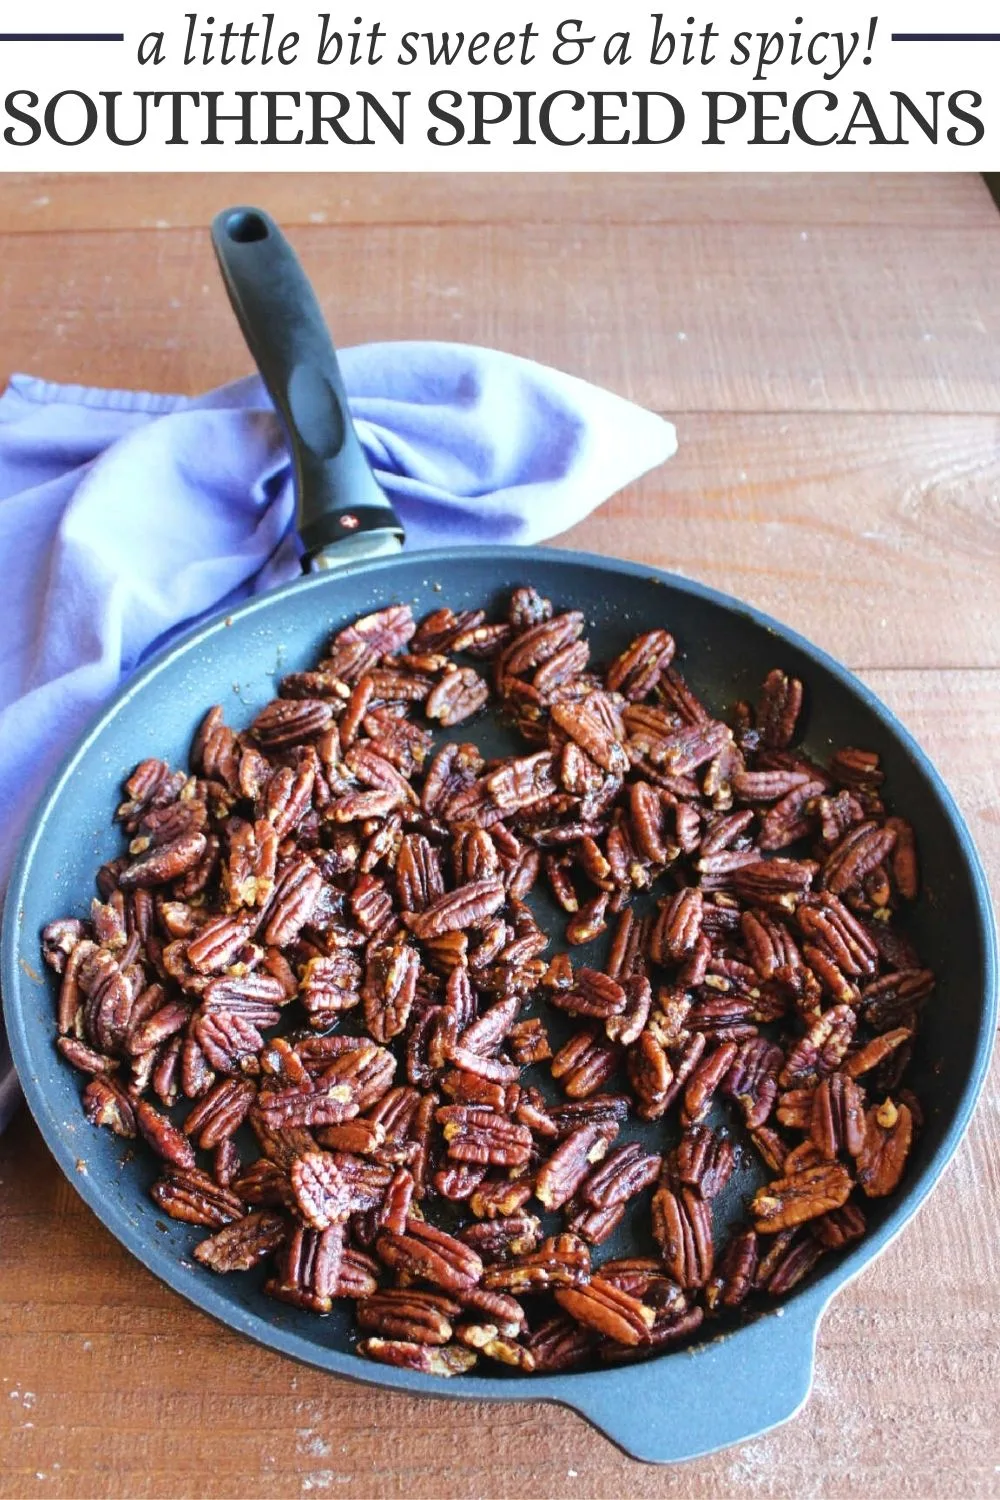 Southern spiced pecans are so versatile. They have a subtle sweetness with a little bit of spice. Serve them as a snack or use them to top your salads. Just promise you will make some!